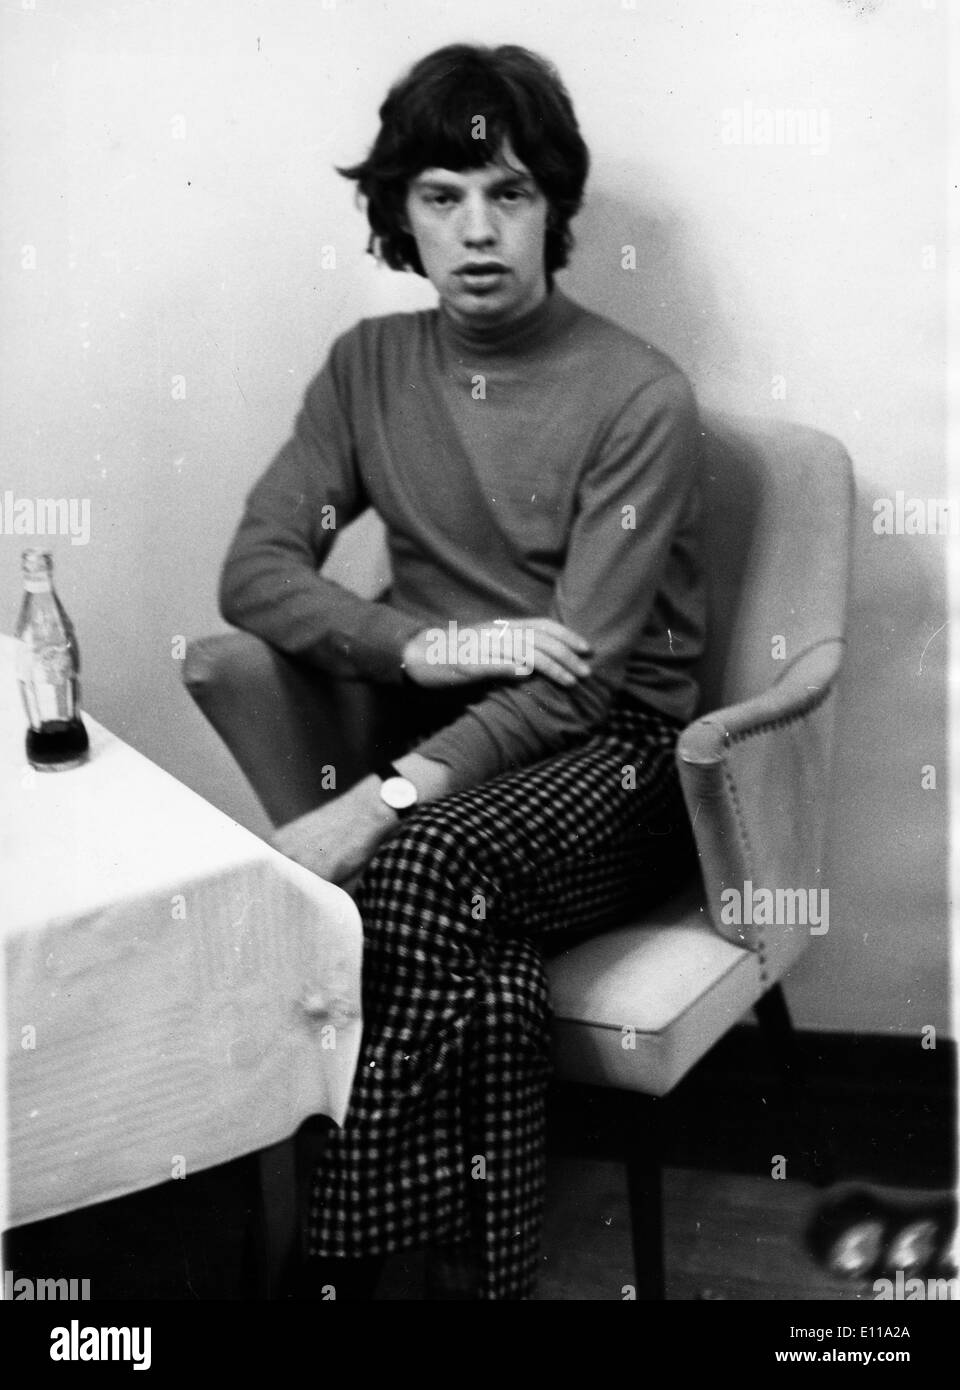 Jun 02, 1976; Munich, Germany; Lead singer MICK JAGGER of the famous British rock group The Rolling Stones, the longest surviving group in the history of rock and roll, pictured while on tour in Germany. (Credit Image: KEYSTONE Pictures USA/ZUMAPRESS.com) Stock Photo